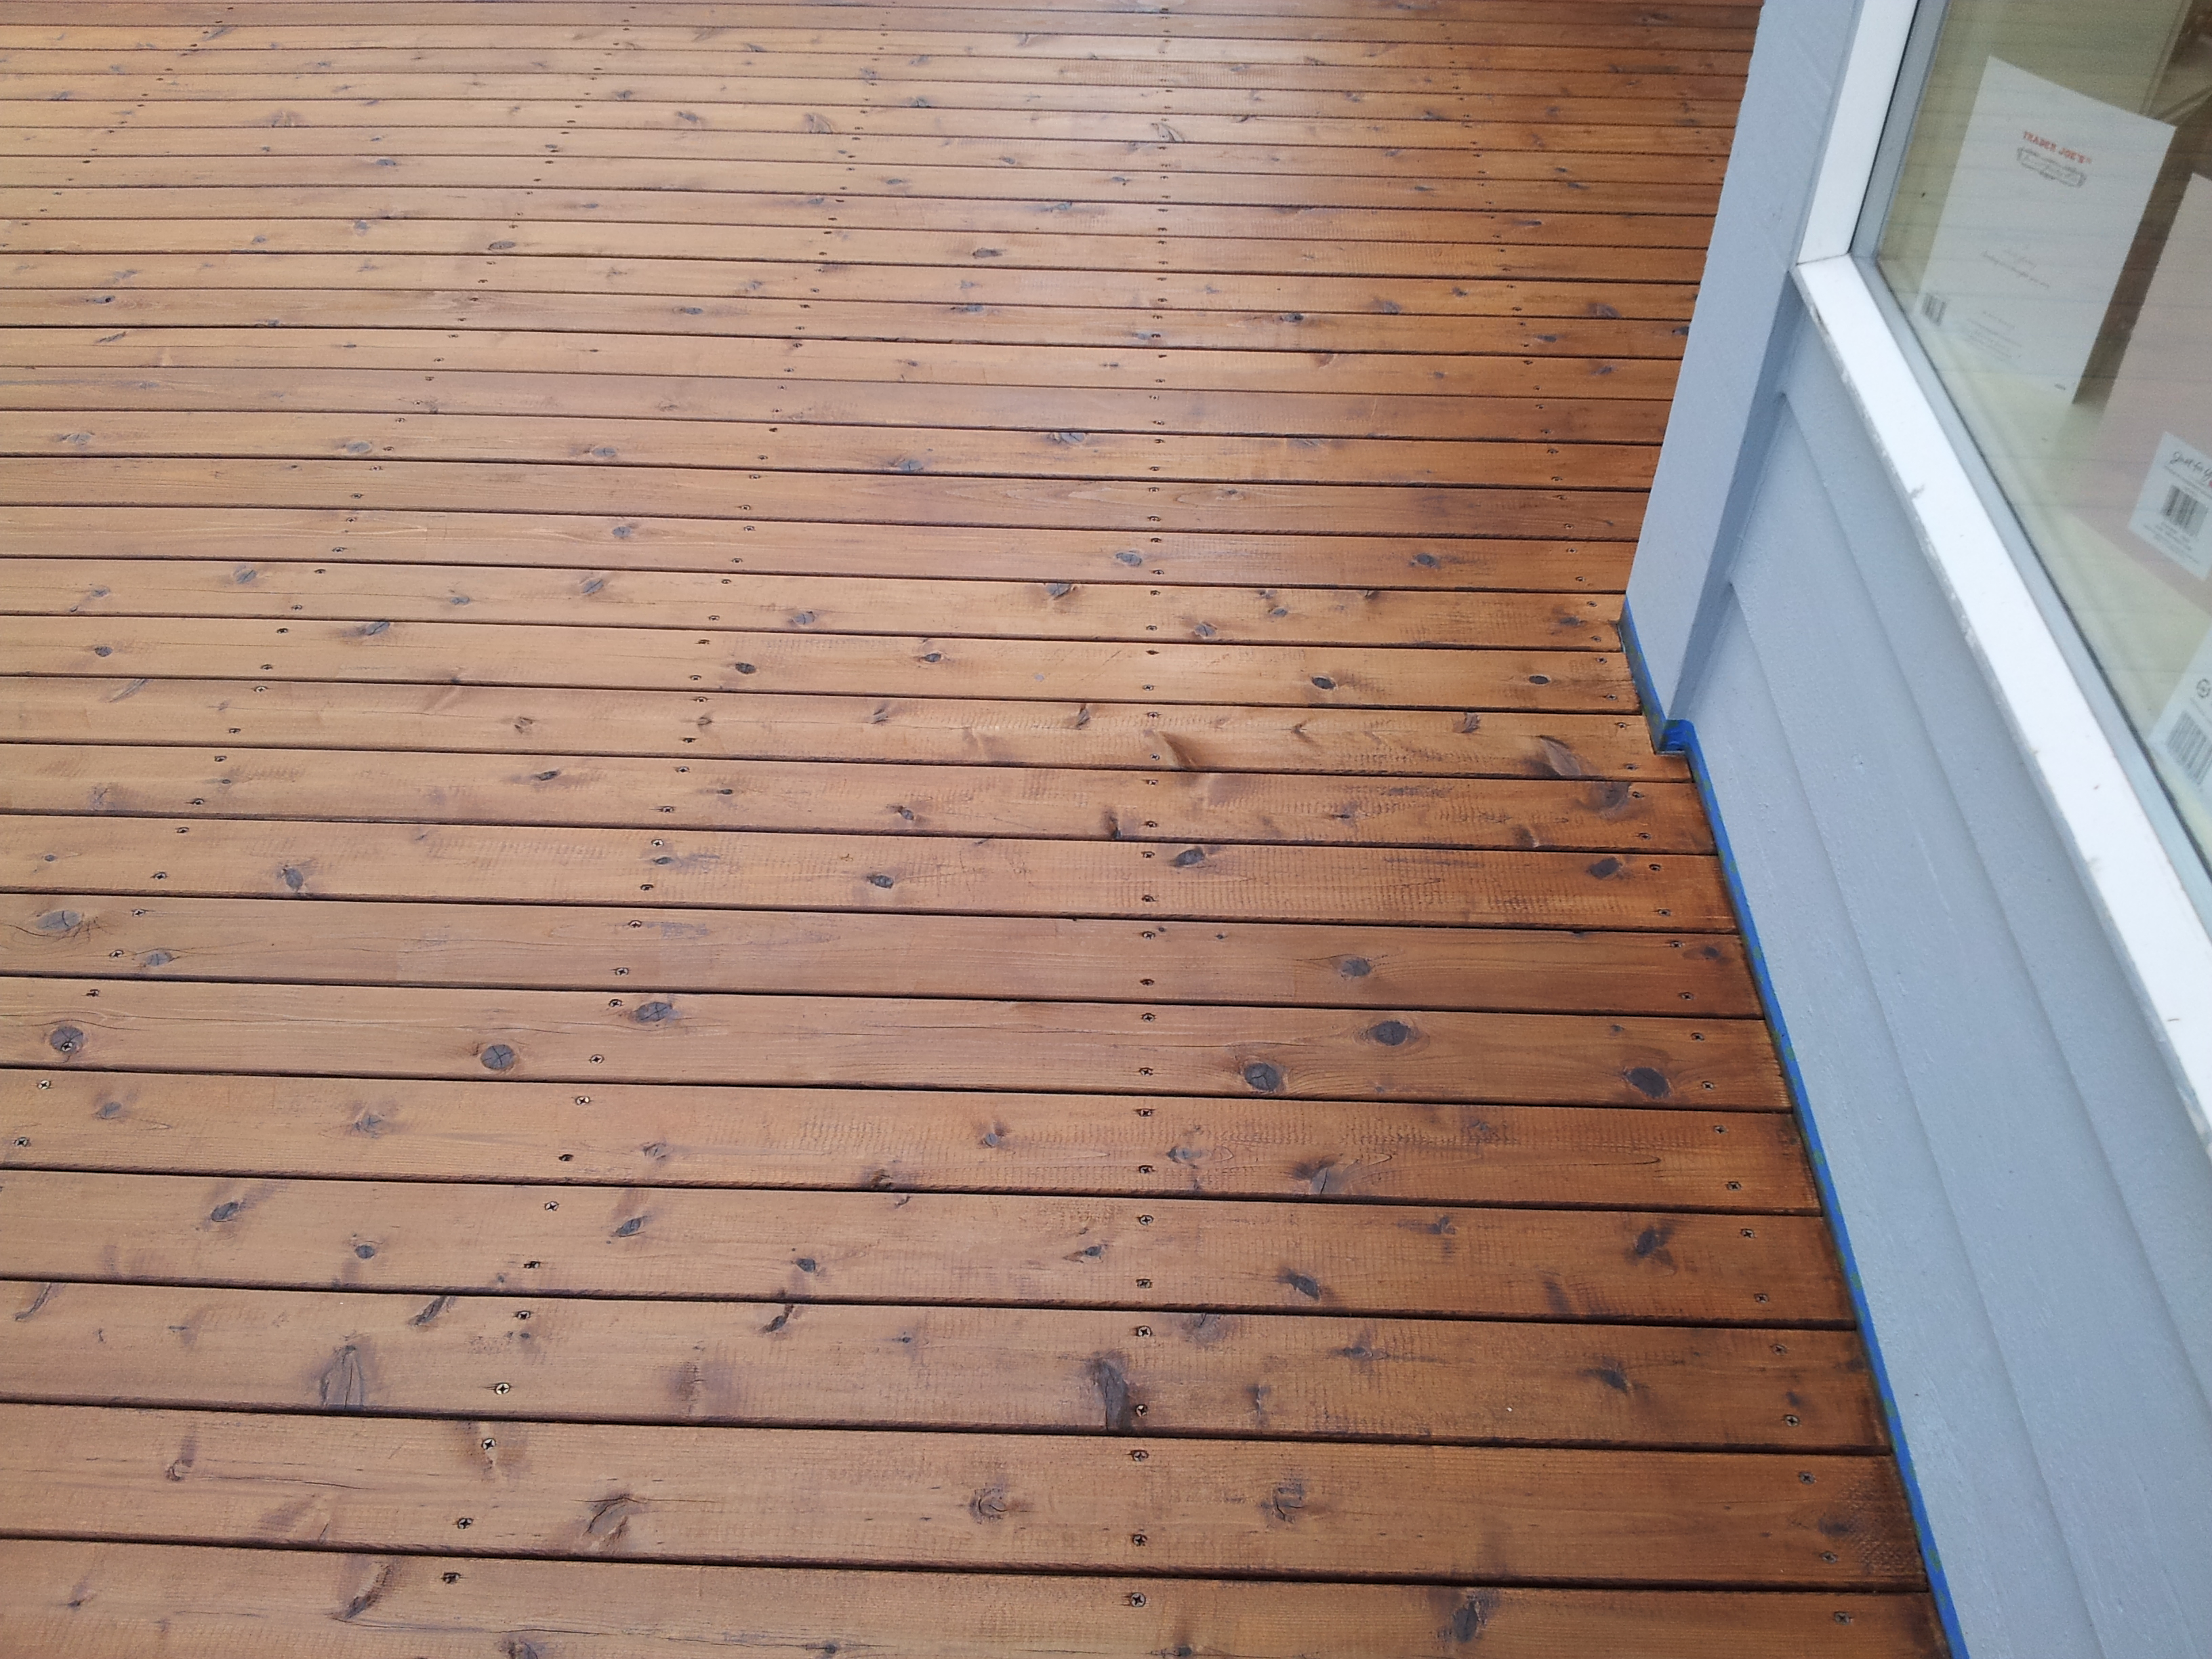 Oil Based Deck Stains 2019 Best Deck Stain Reviews Ratings for measurements 3264 X 2448